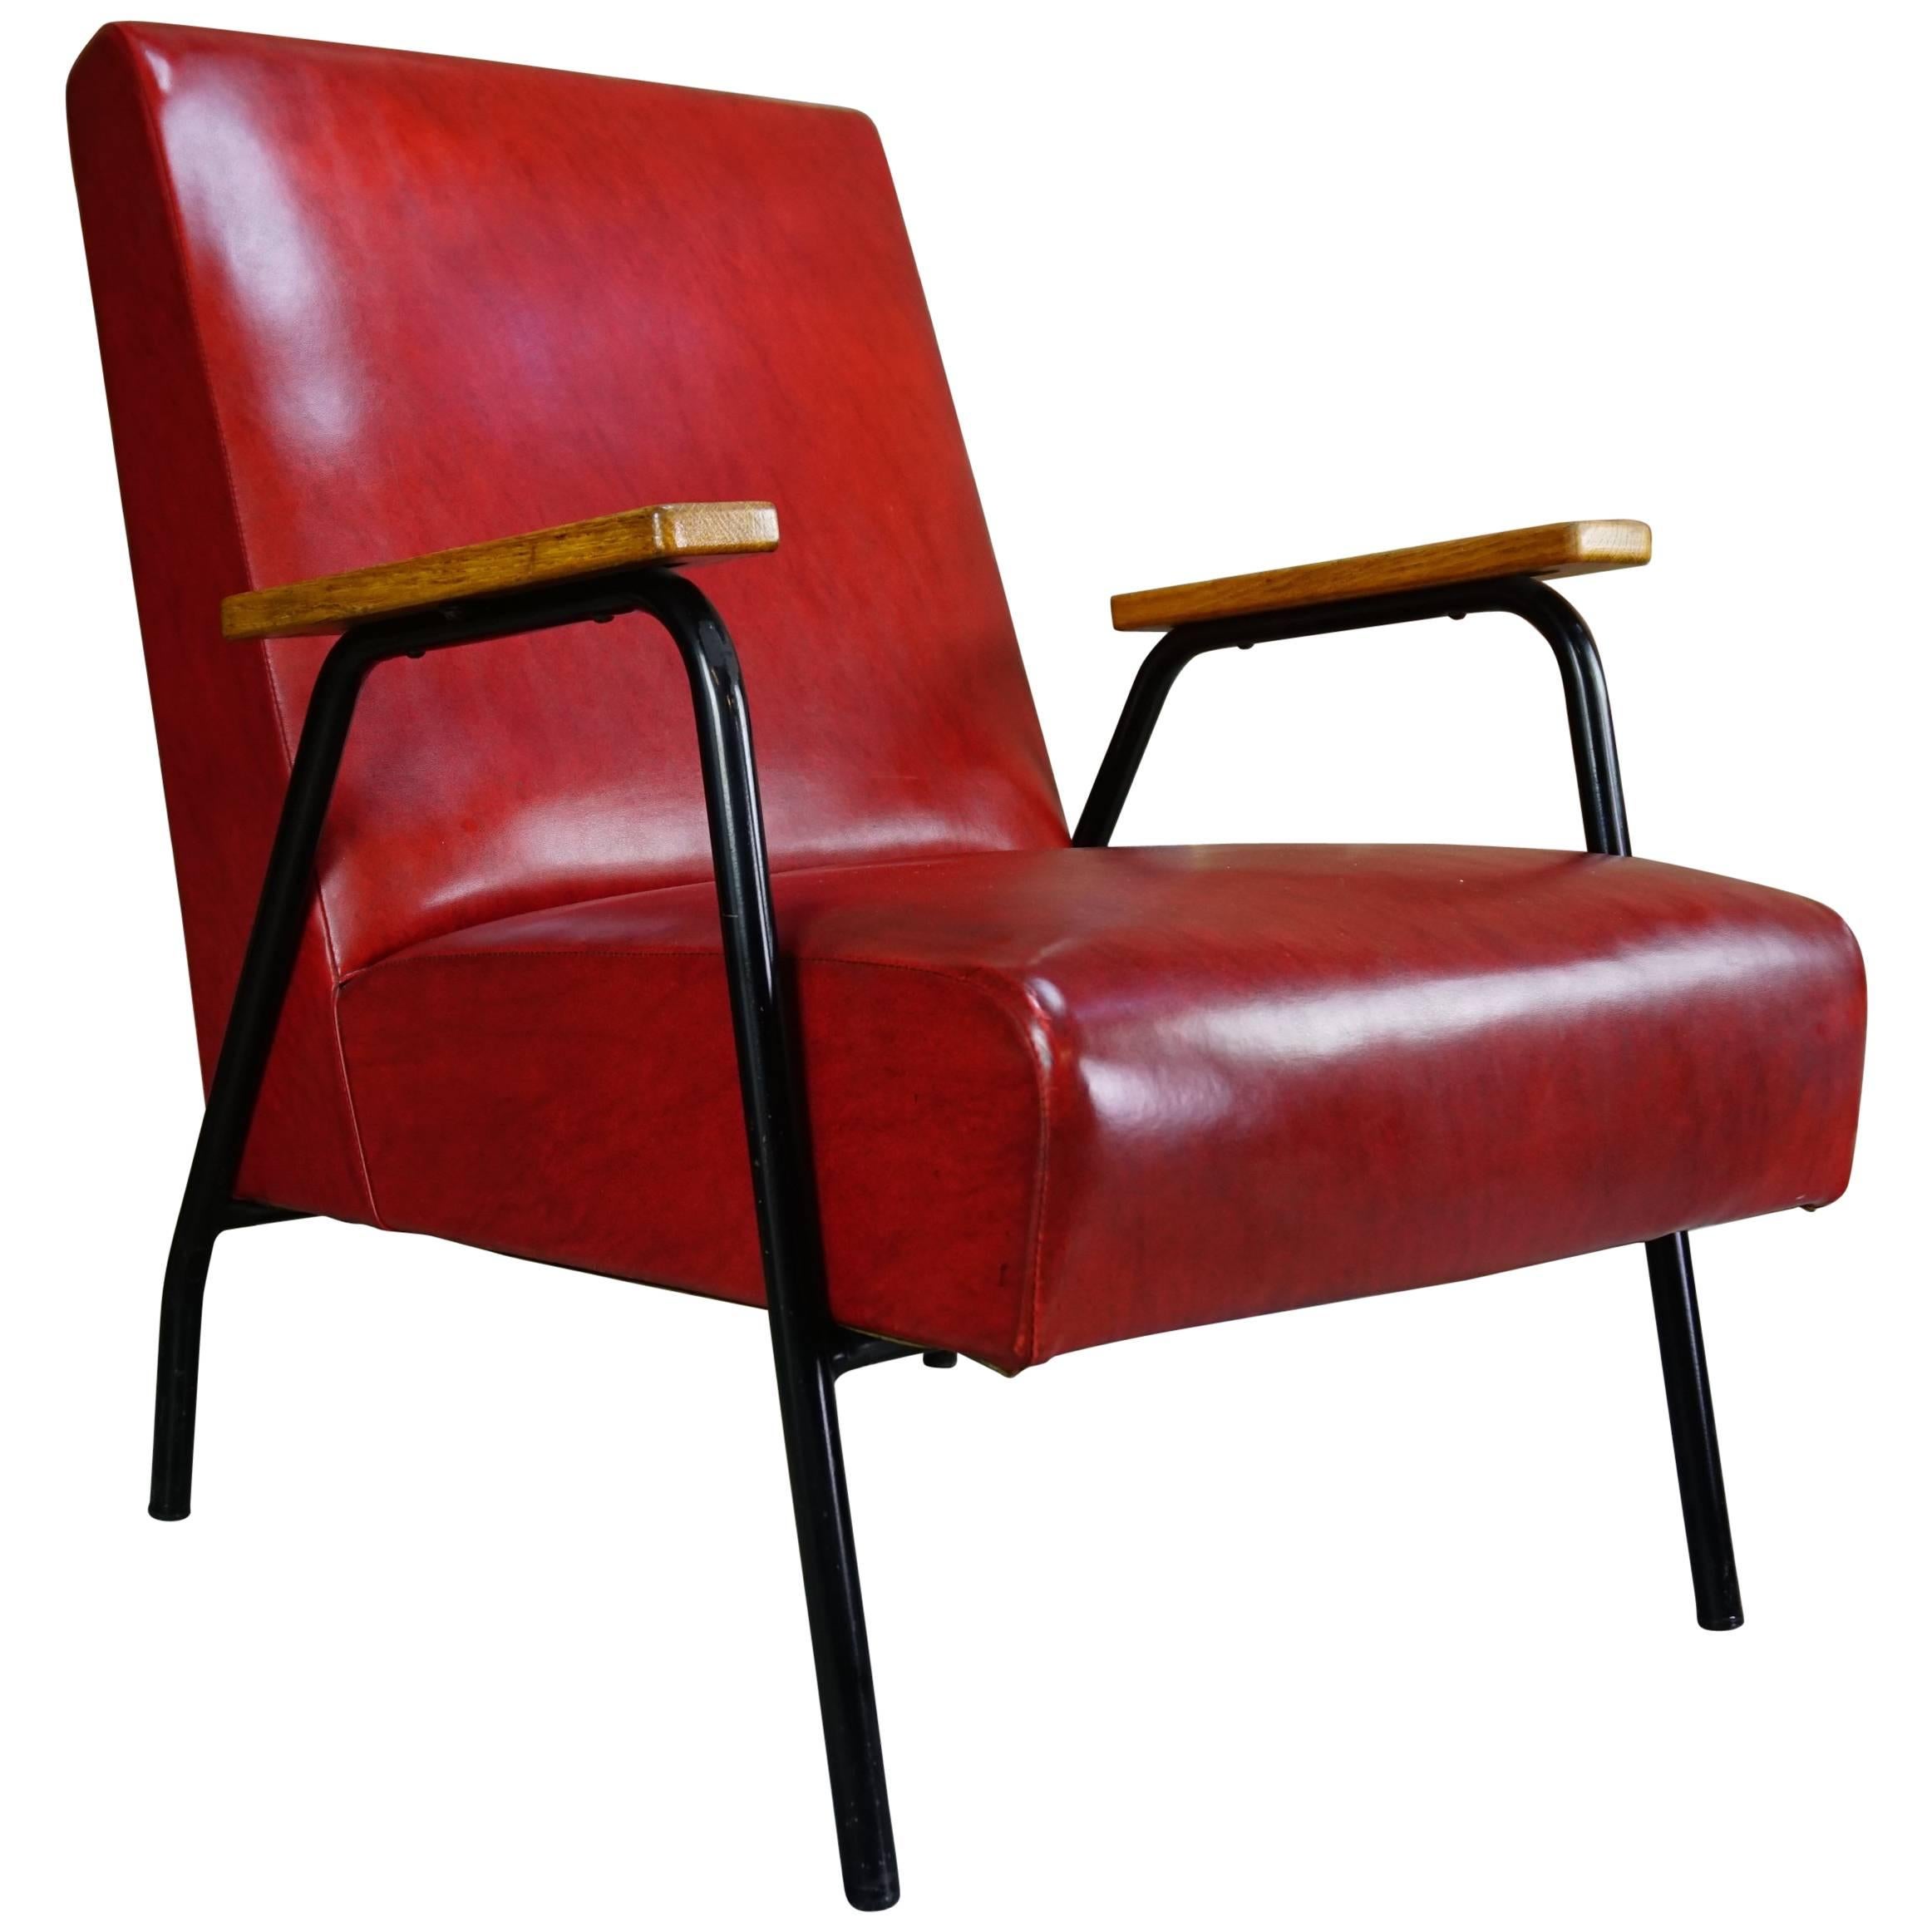 Pierre Guariche French Design of the 1950s Armchair "Rio" Model for Meurop